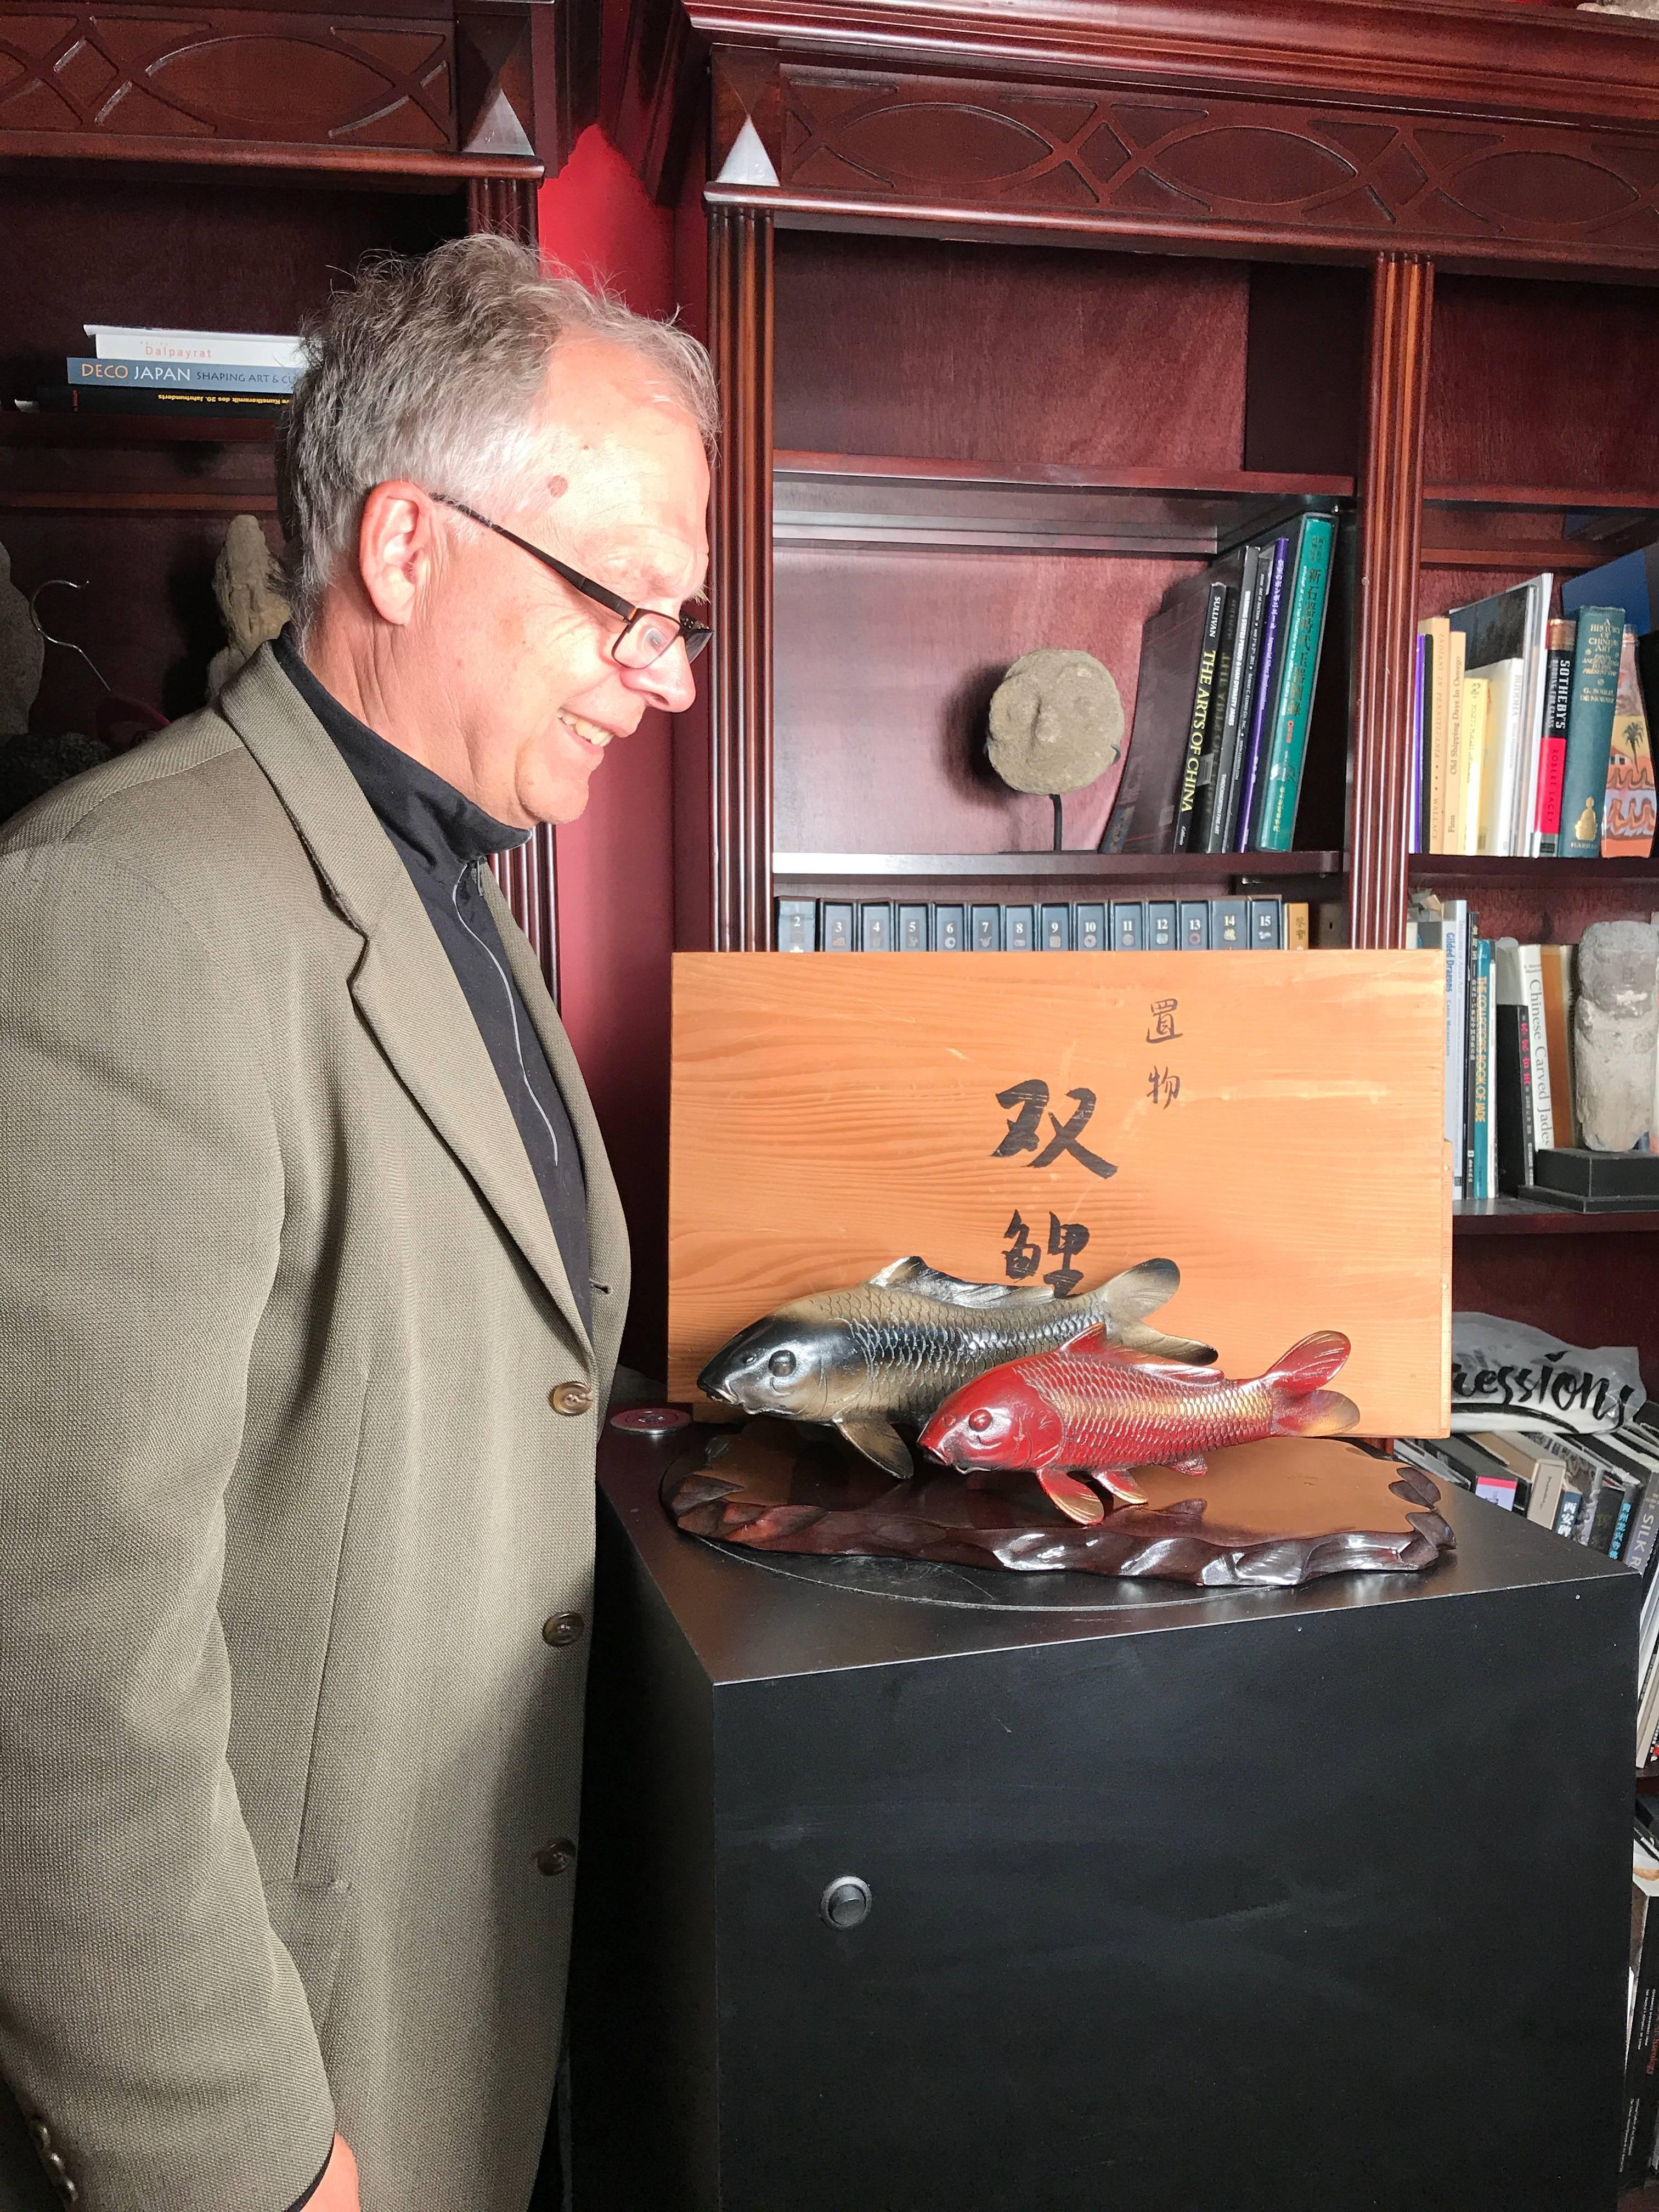 Signed, mint and boxed

Here's a rare find from a collector we visited in Kyoto. A very unusual treasure from Japan. 

This is a finely crafted pair of bronze koi one in white color and one in brown color and both accompanied by their original